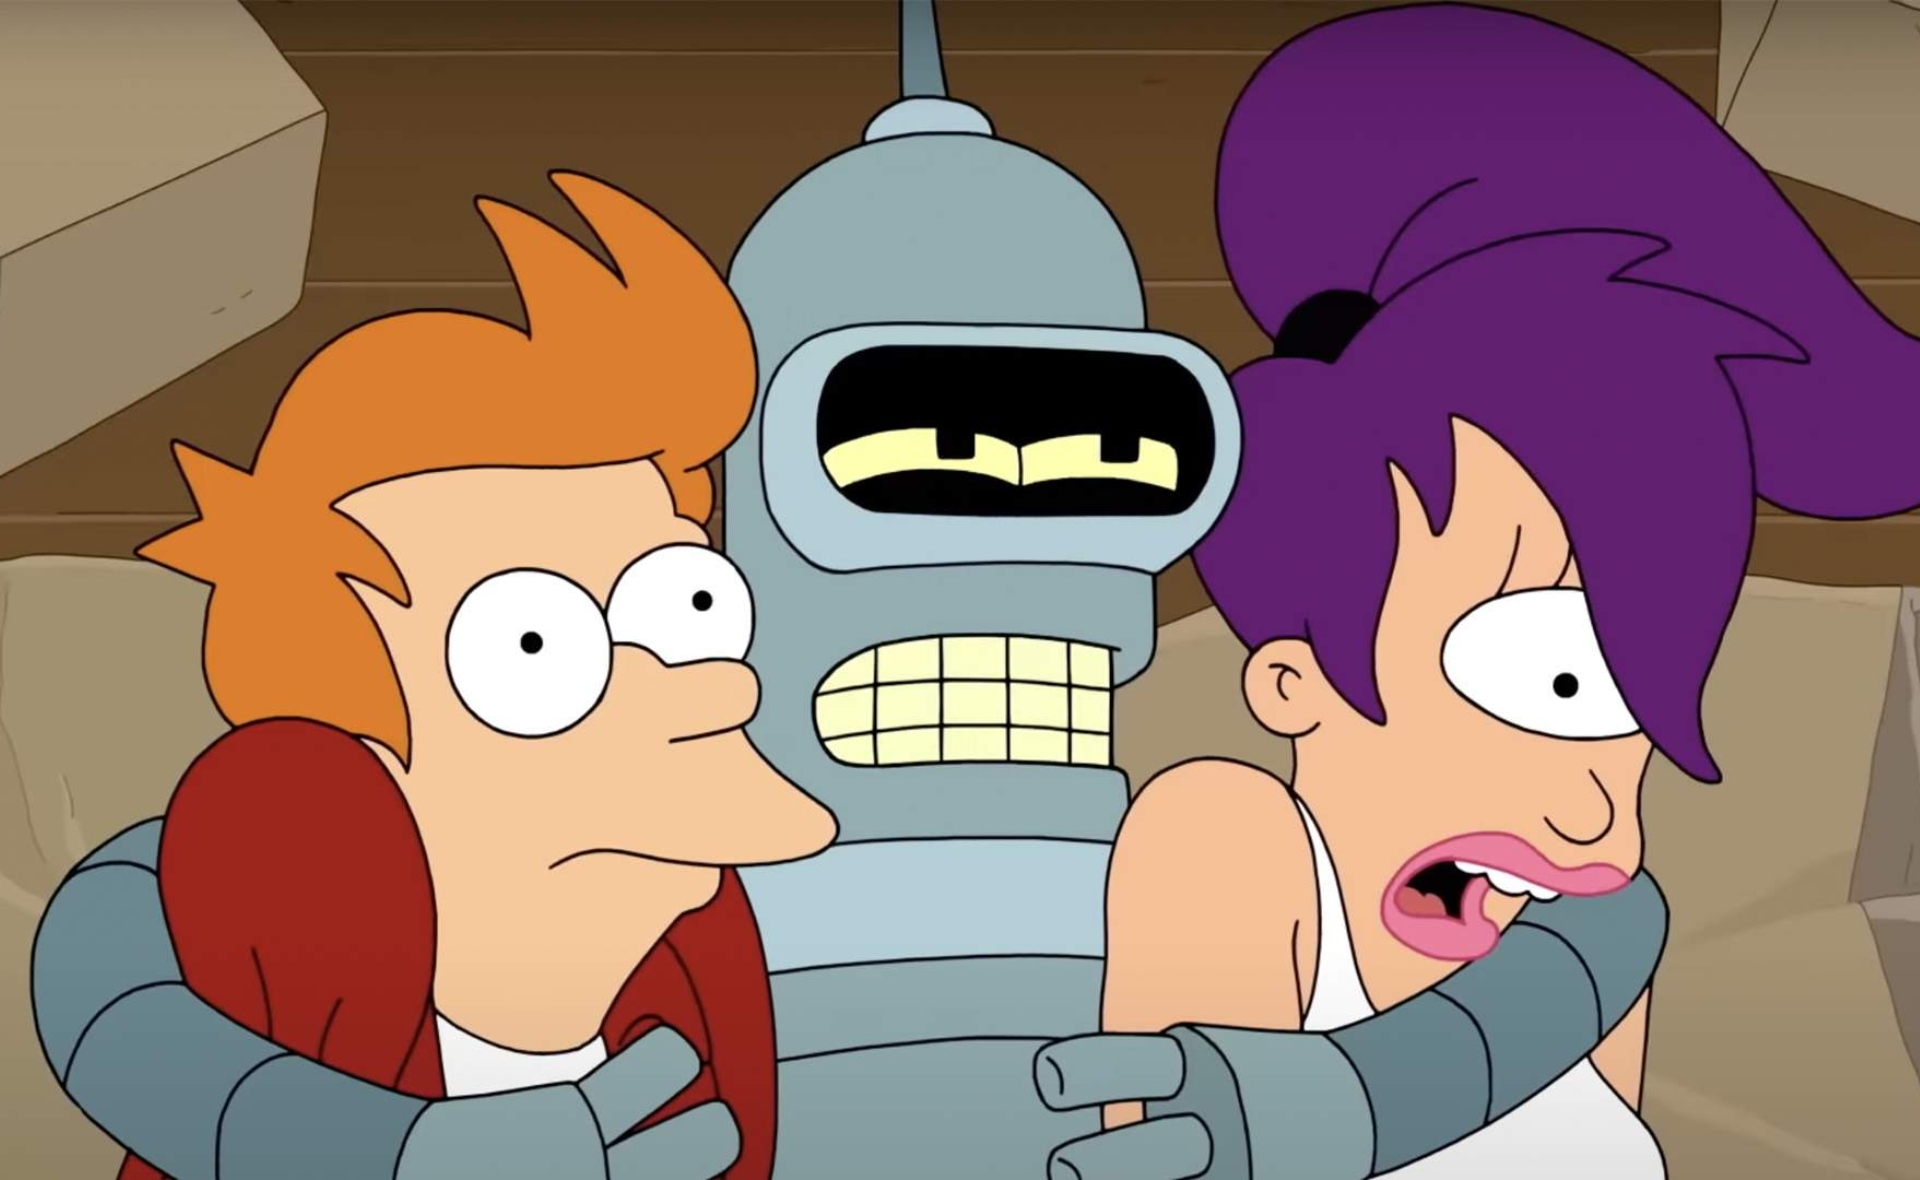 We’re headed back to the future with the return of Futurama